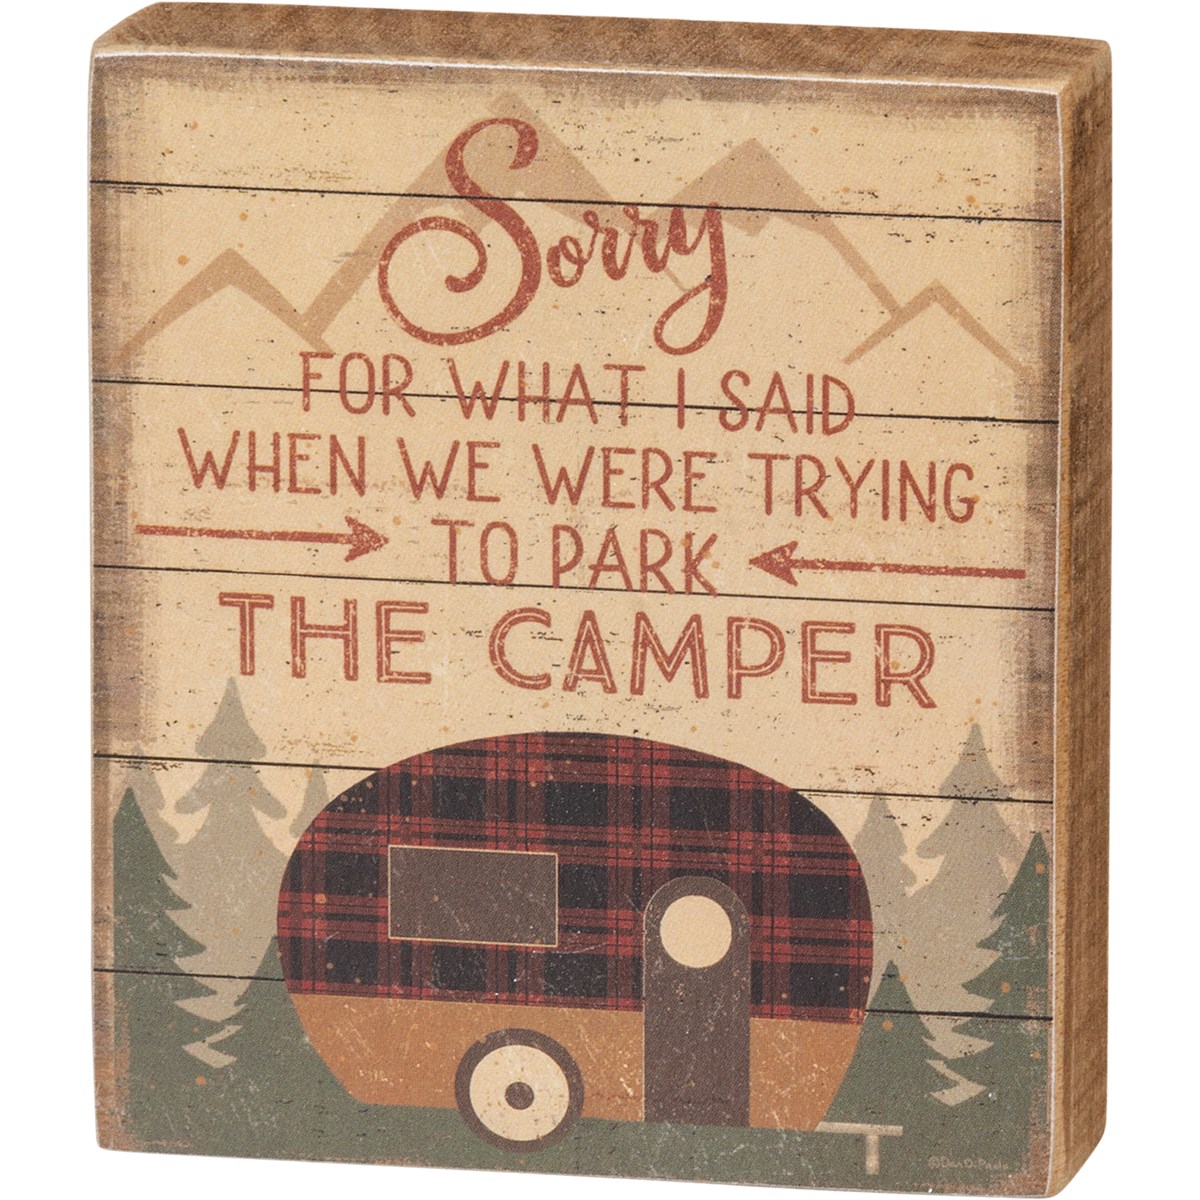 Block Sign - Trying To Park The Camper - 3.50" x 4" x 1" - Wood, Paper